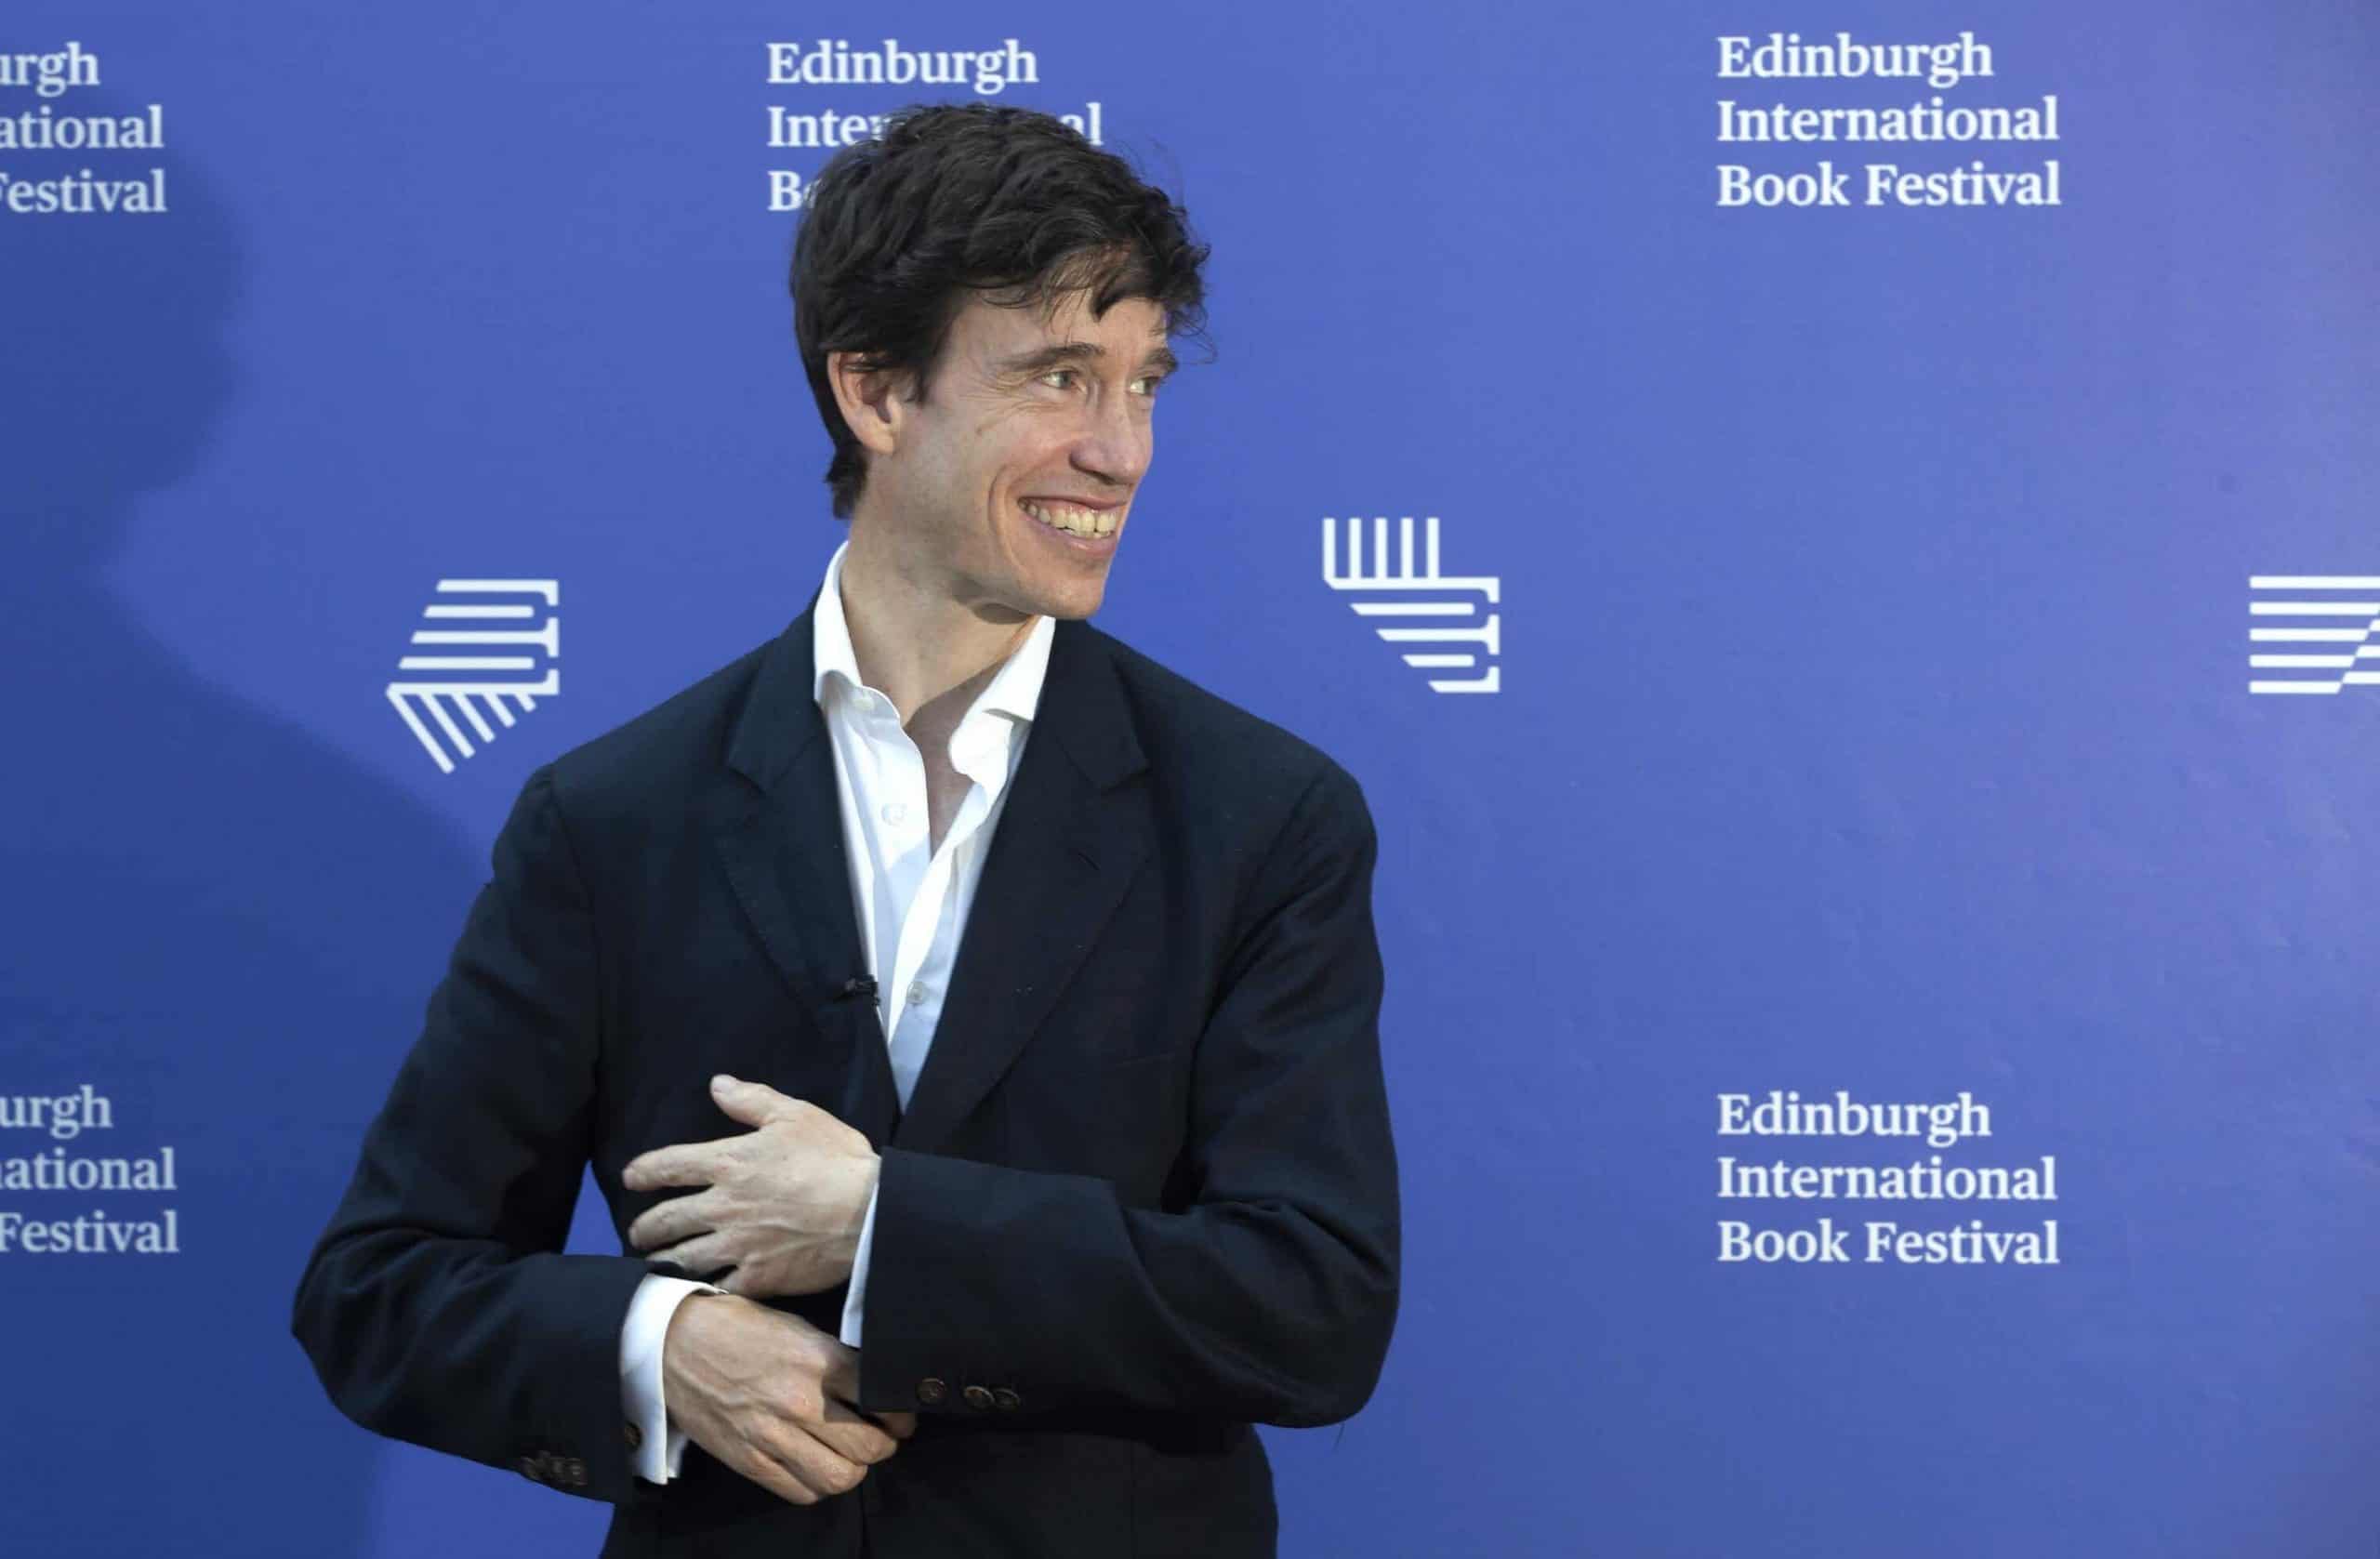 Rory Stewart asks Londoners to invite him over for a sleepover